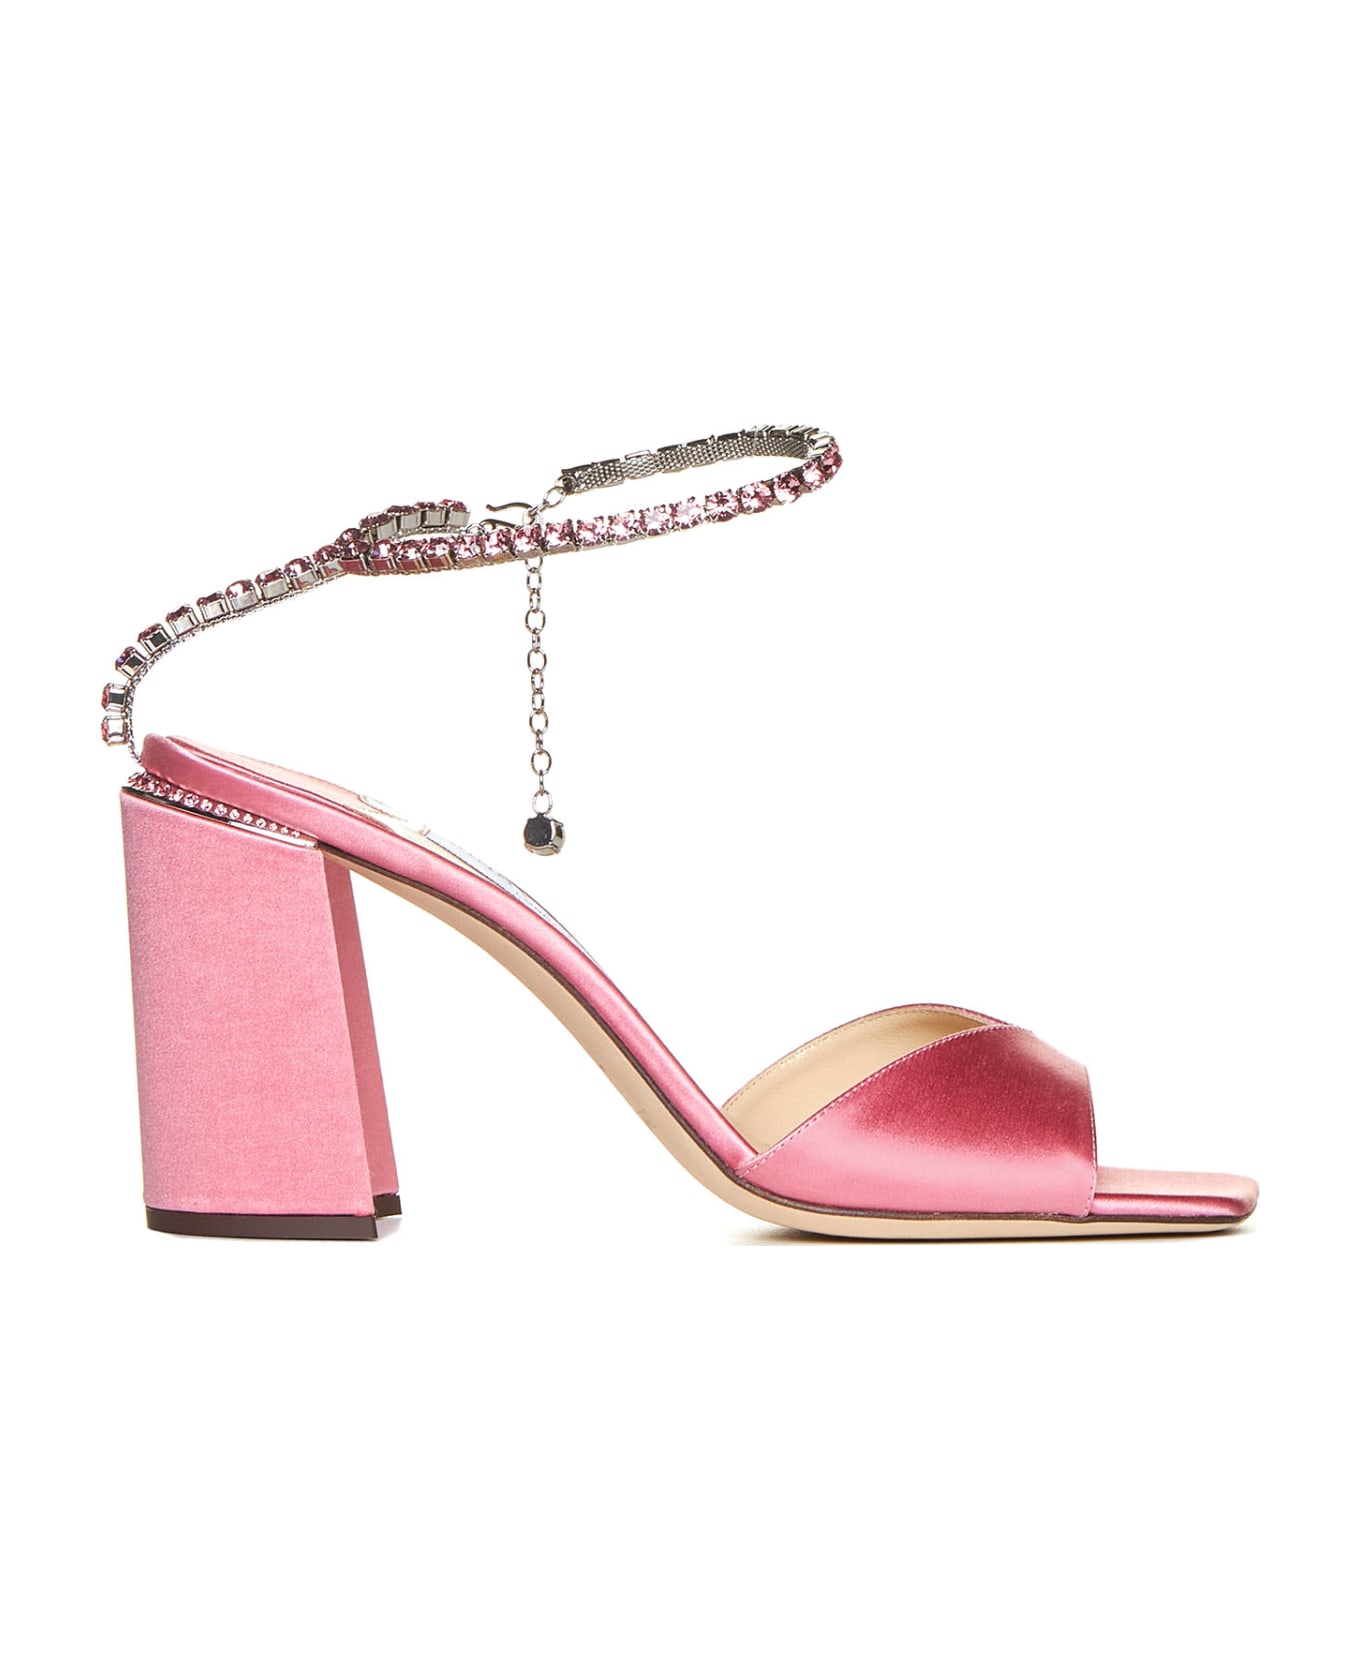 Jimmy Choo Sandals - Candy pink/candy pink サンダル